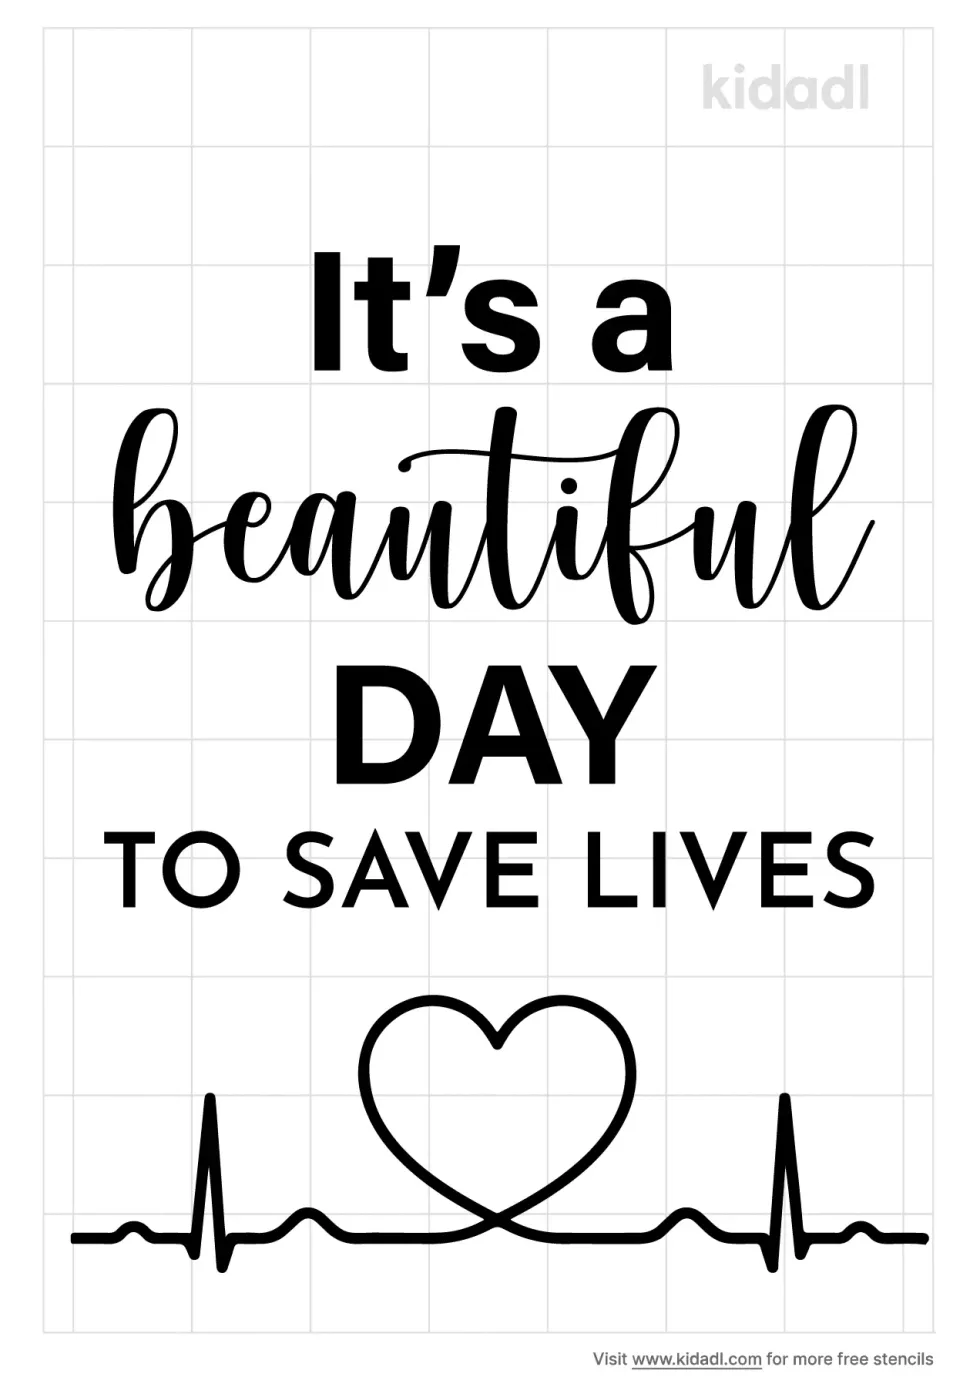 It's A Beautiful Day To Save Lives Stencil